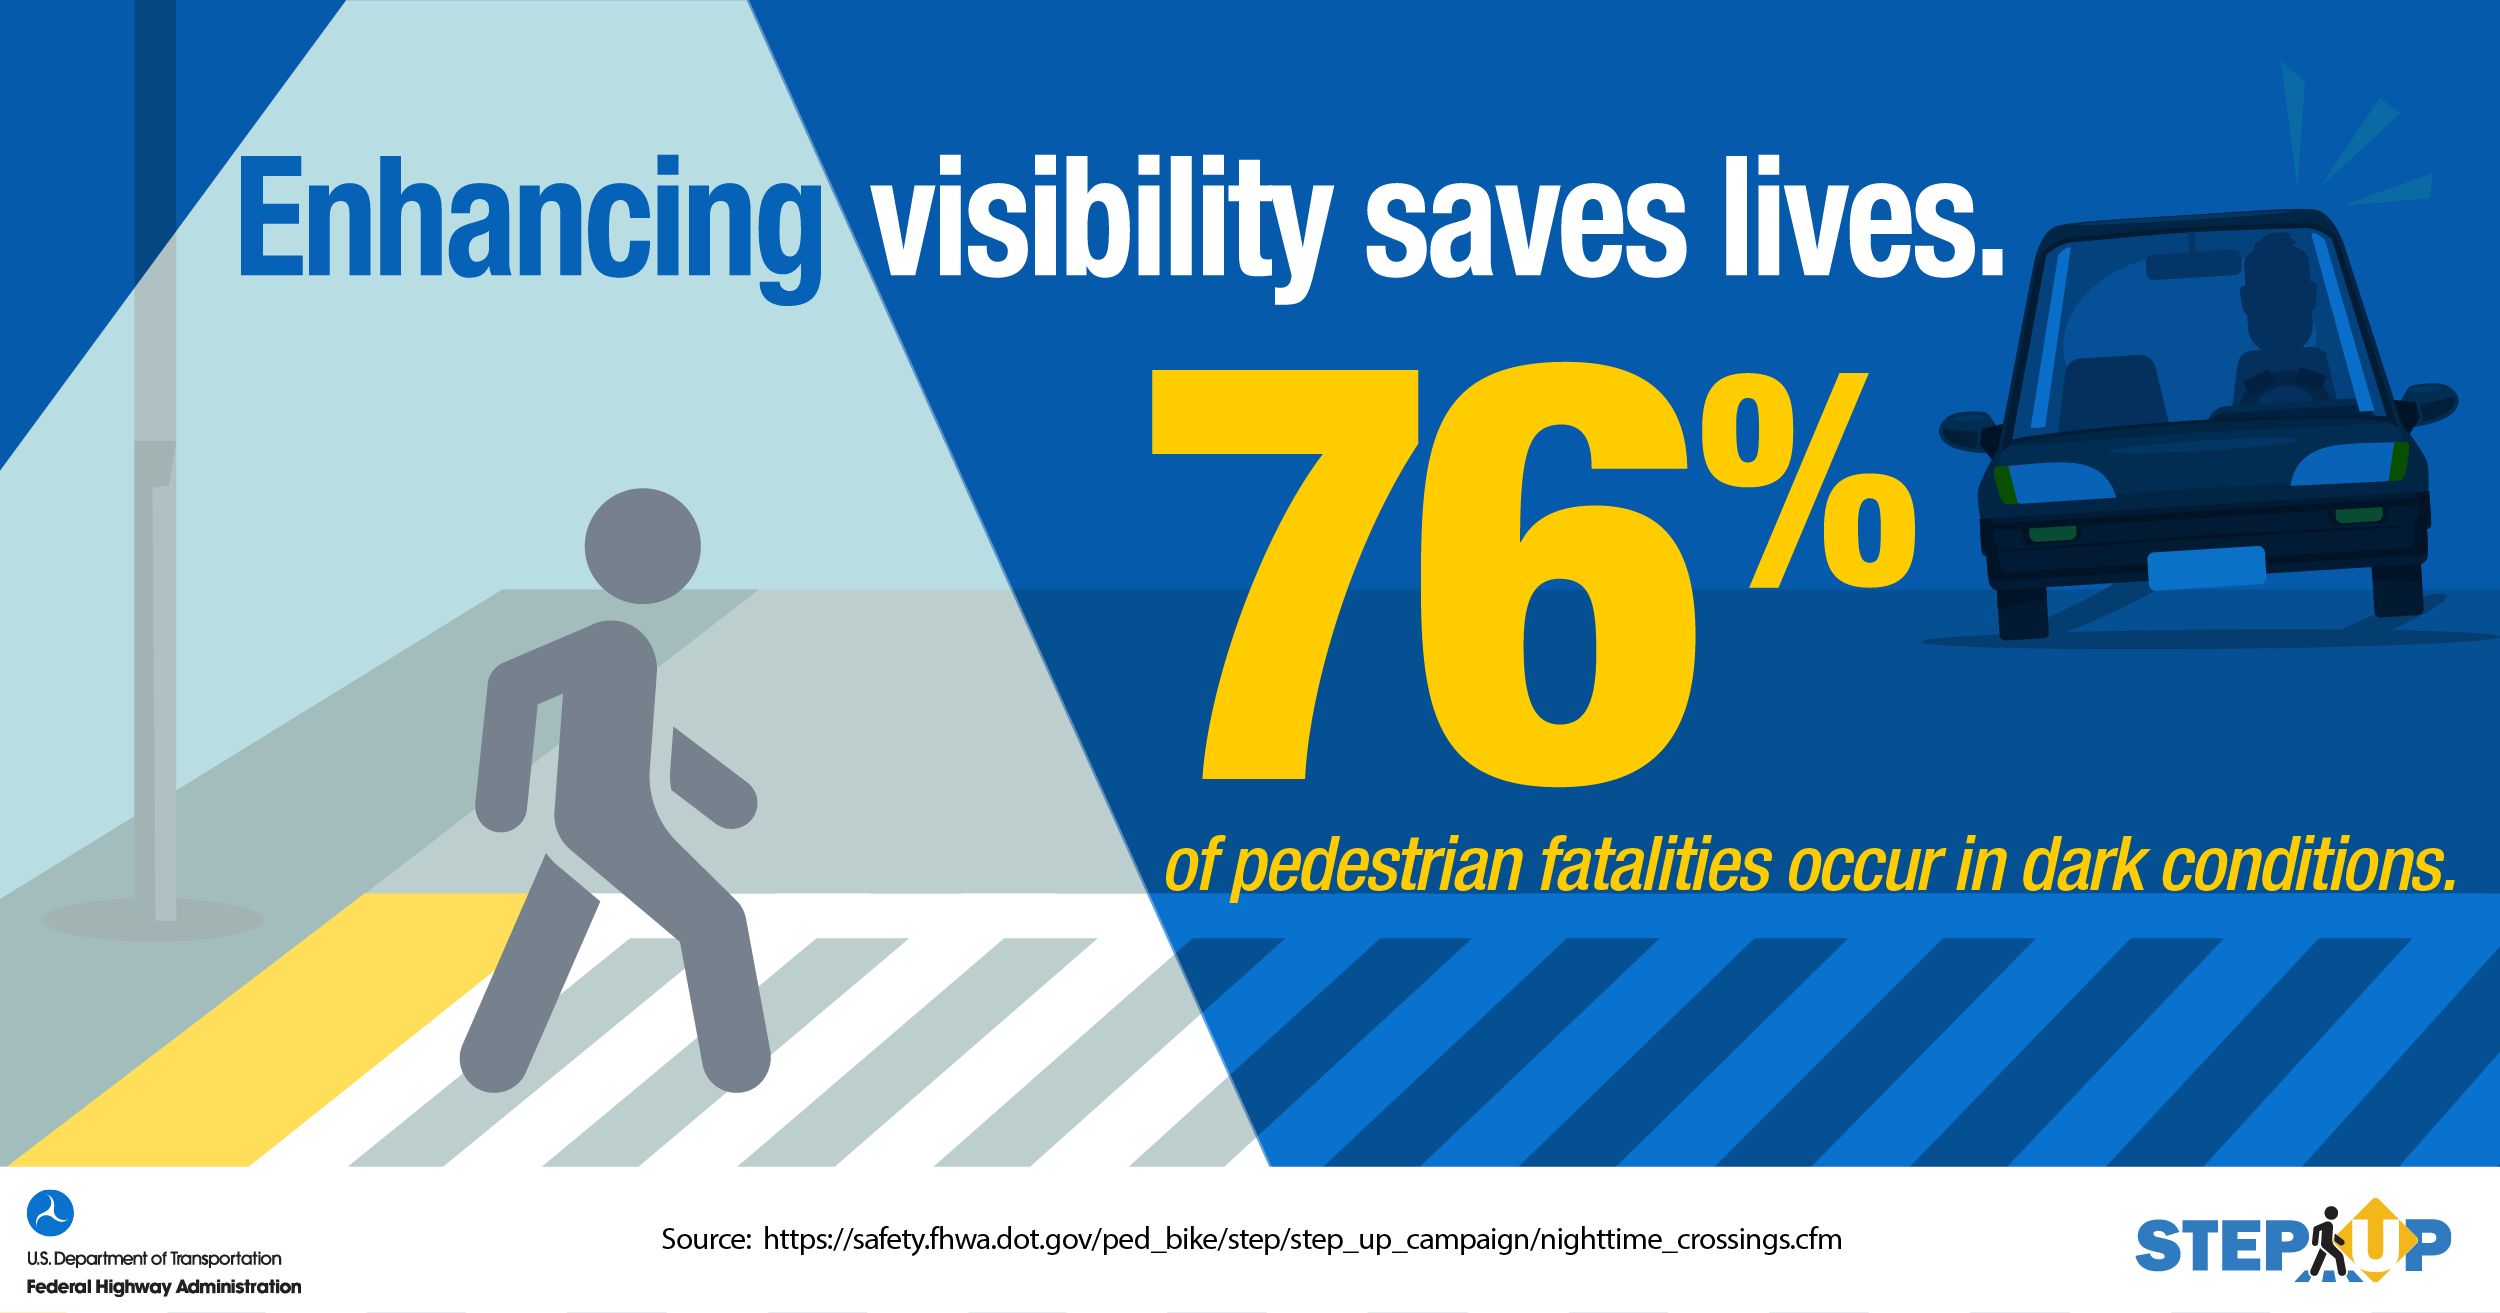 STEP infographic with a pedestrian in a spotlight, safely crossing the street. "Enhancing visibility saves lives. 76% of pedestrian fatalities occur in dark conditions."